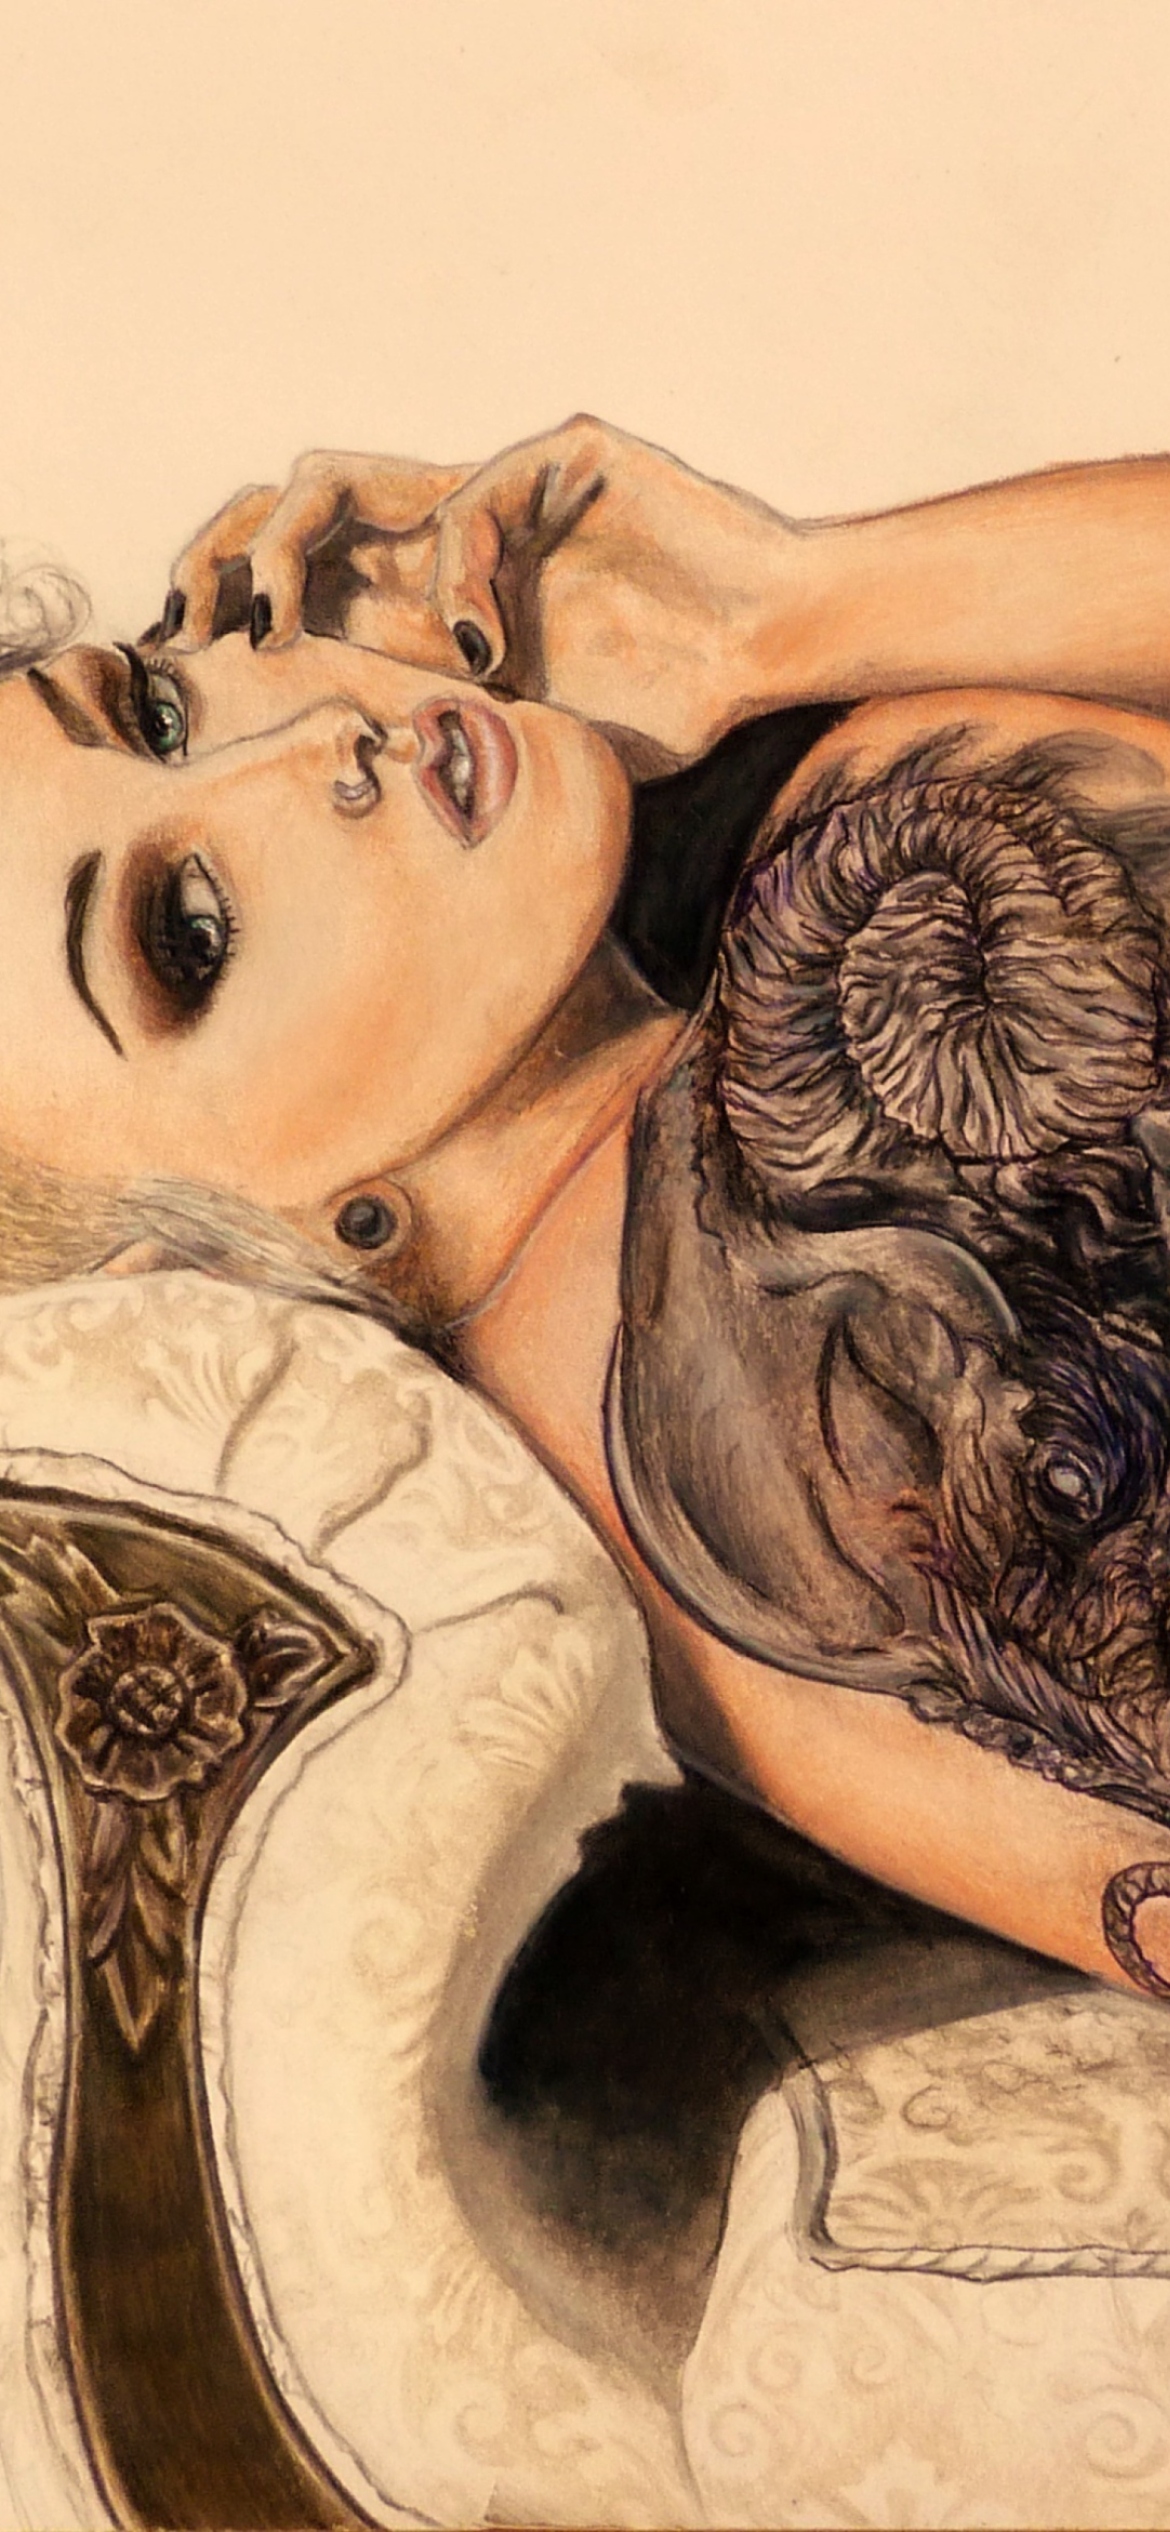 Das Drawing Of Girl With Tattoo Wallpaper 1170x2532